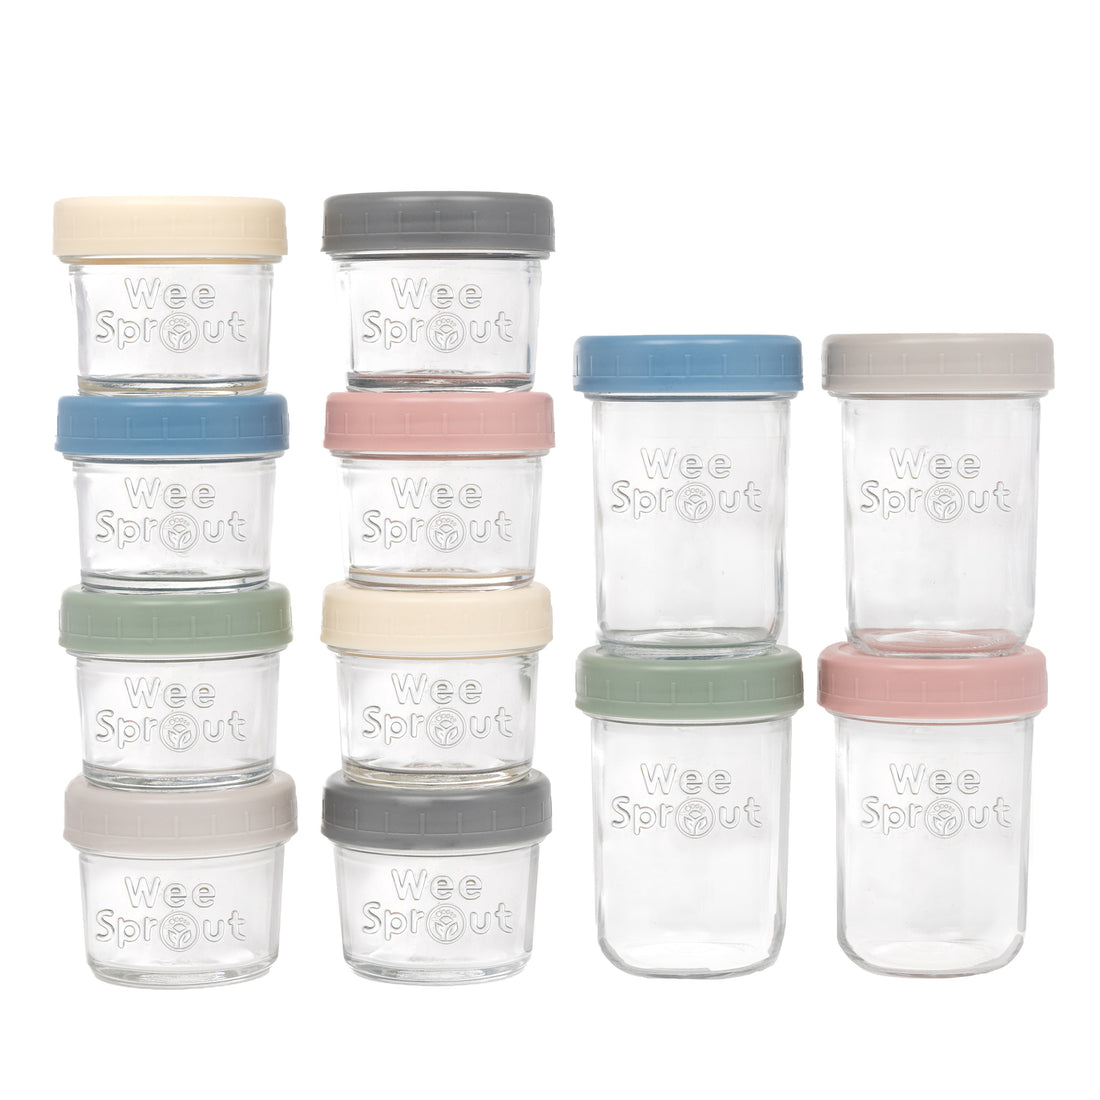 Little Sprout Reusable Stackable Storage Cups with Tray and Dry-erase Marker